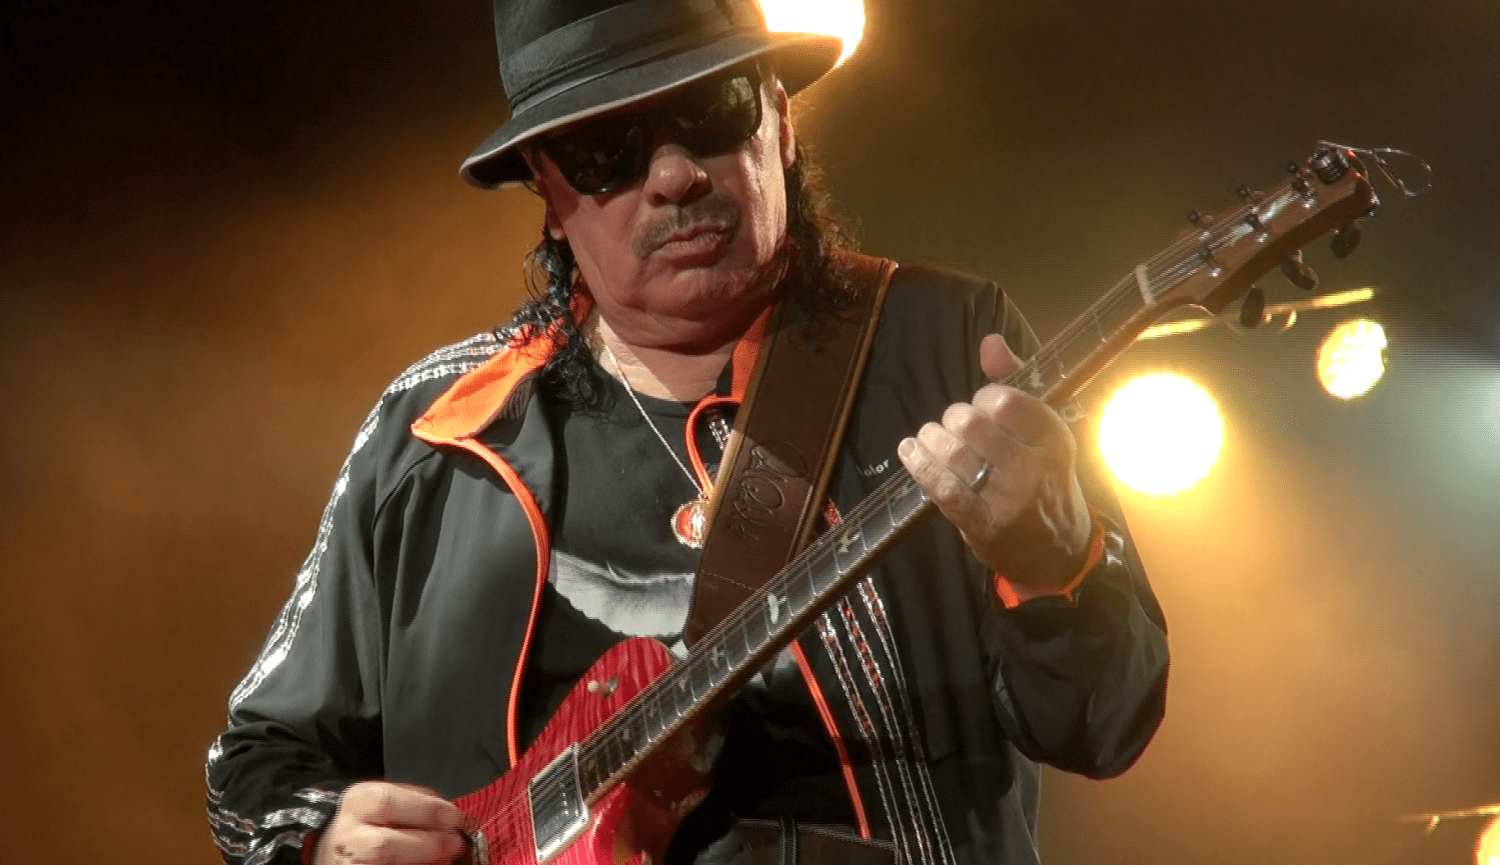 Rock Legend Carlos Santana Gives Us 'Power of Peace' With New Album